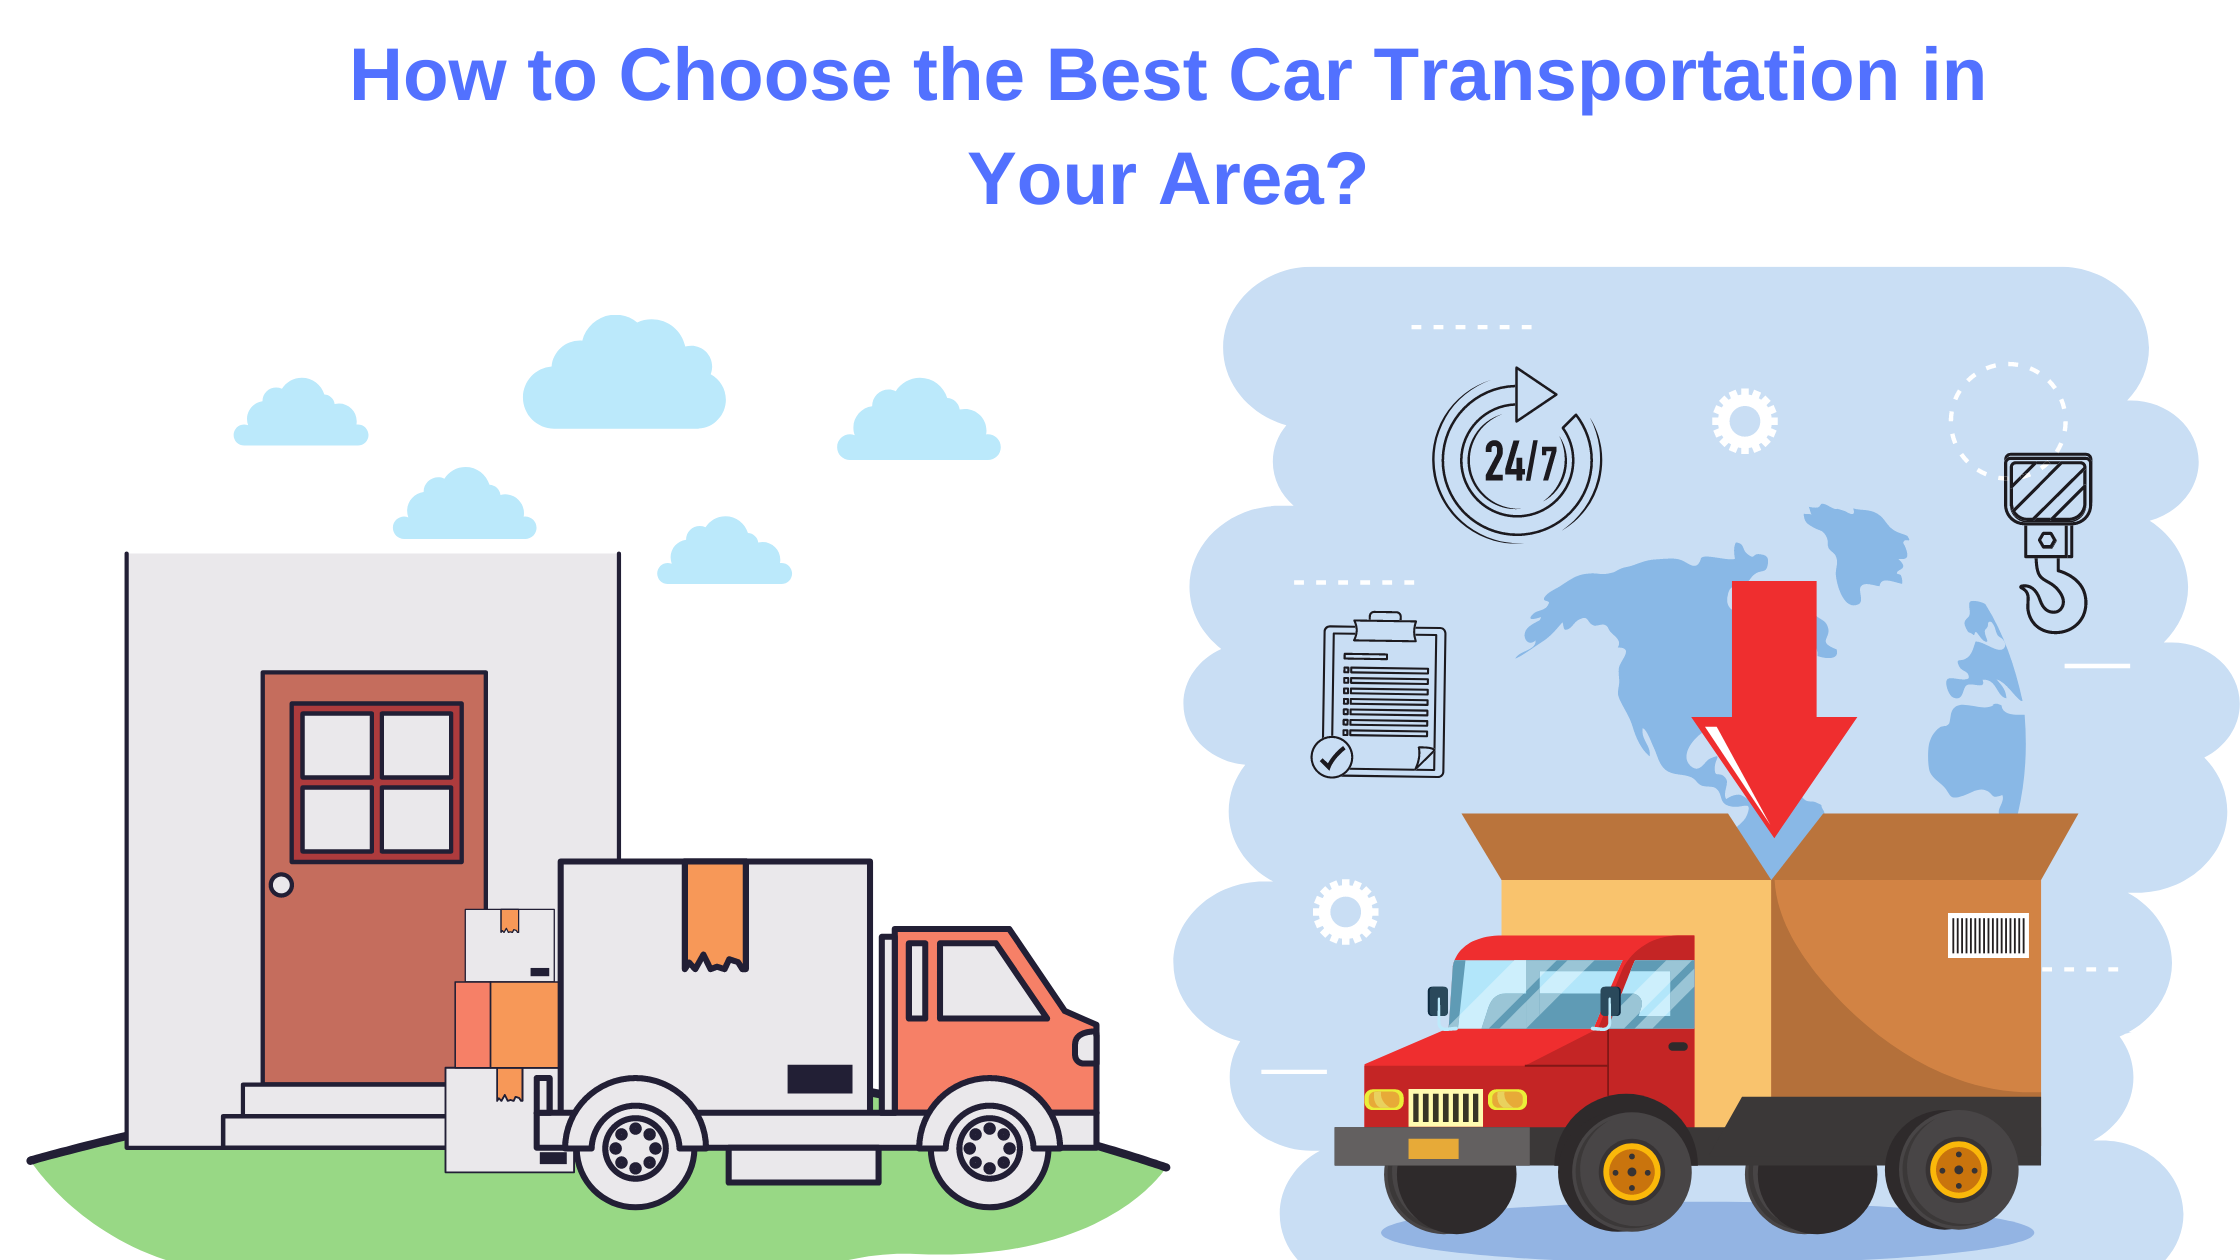 How to Choose the Best Car Transportation in Your Area?